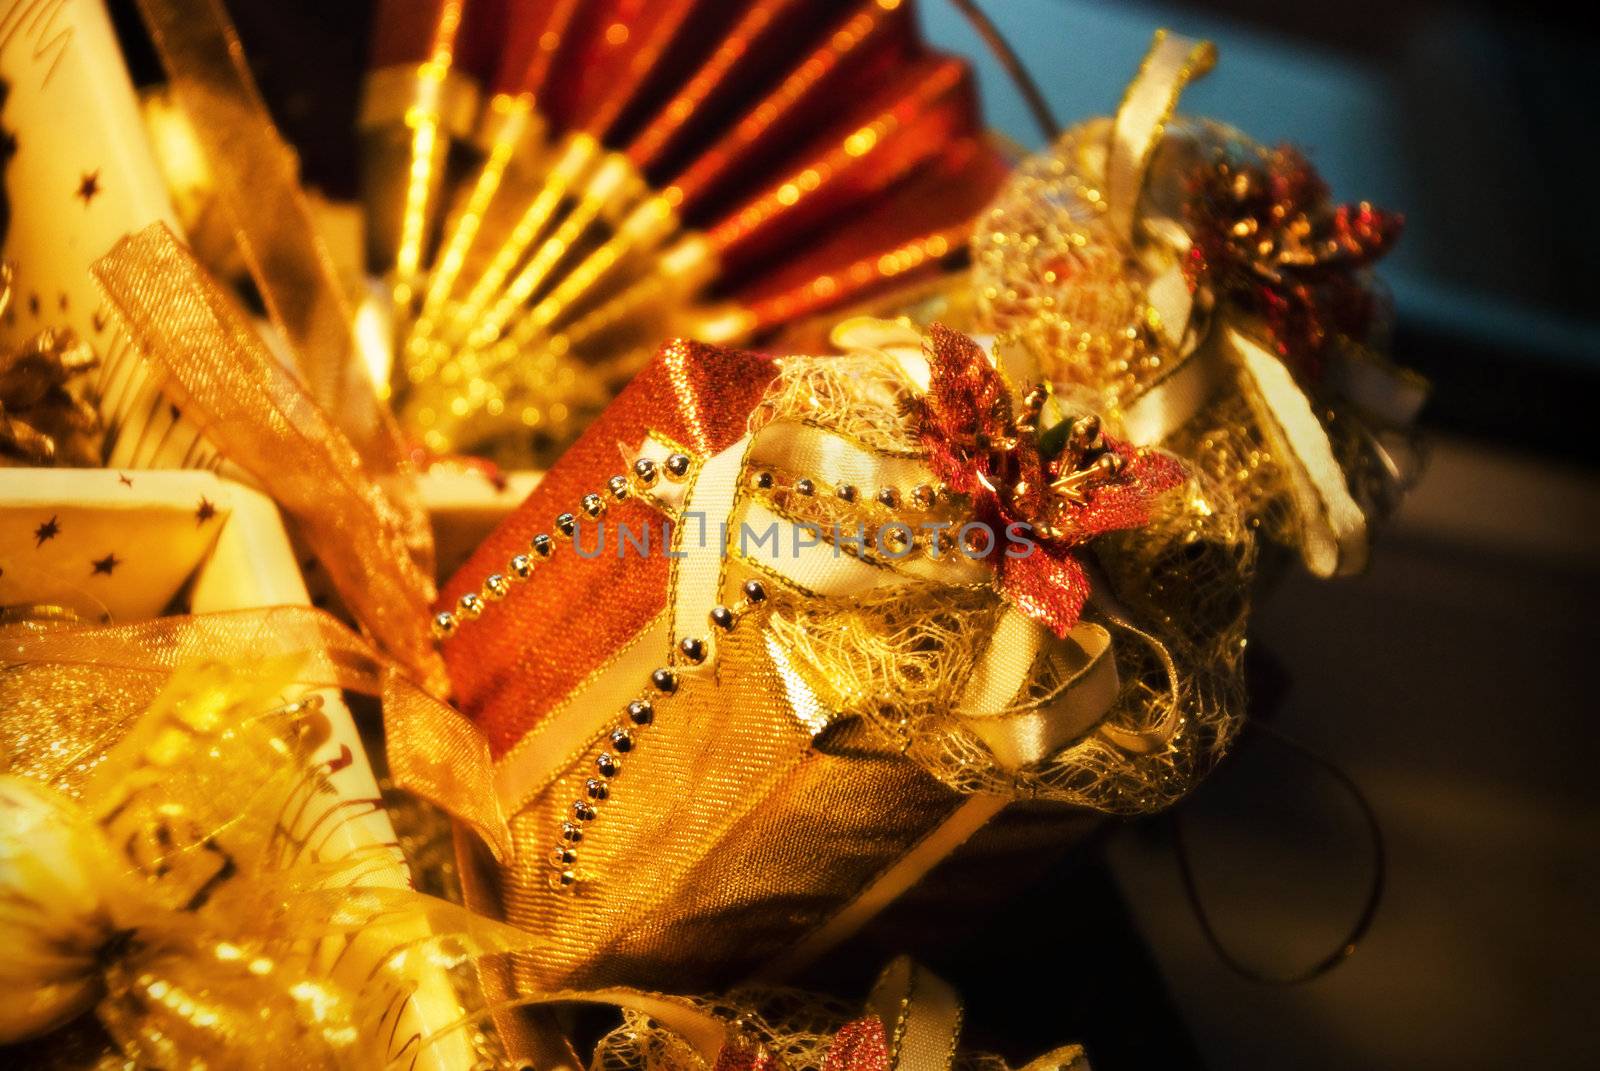 Golden gift boxe with leaf of Mistletoe. Are tied up by tapes with bows
